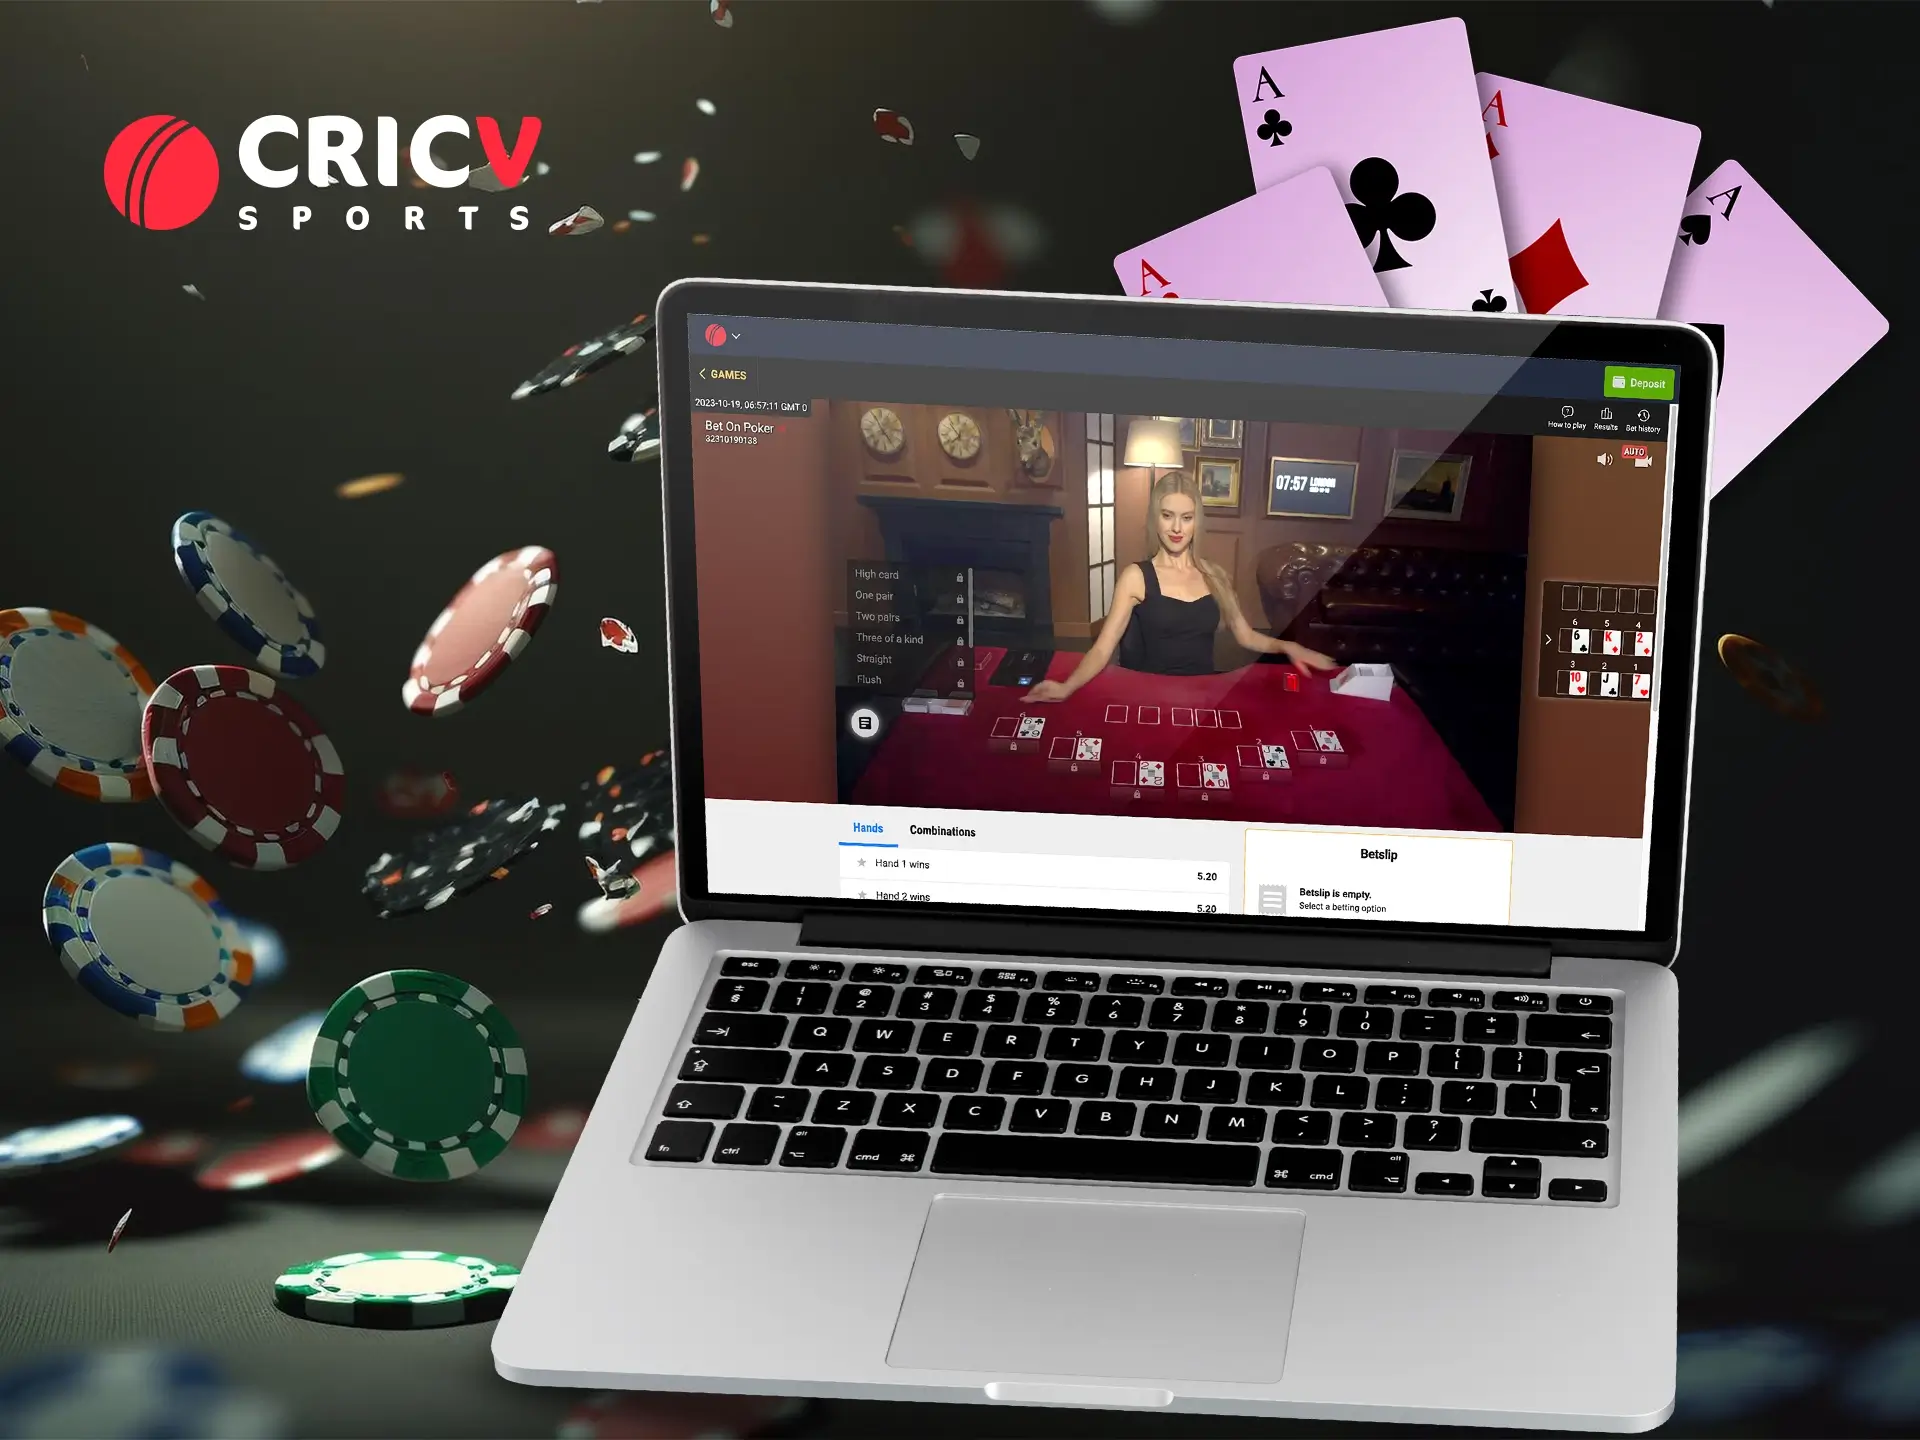 Get your valuable experience in the casino industry by interacting with the real dealer and other players.